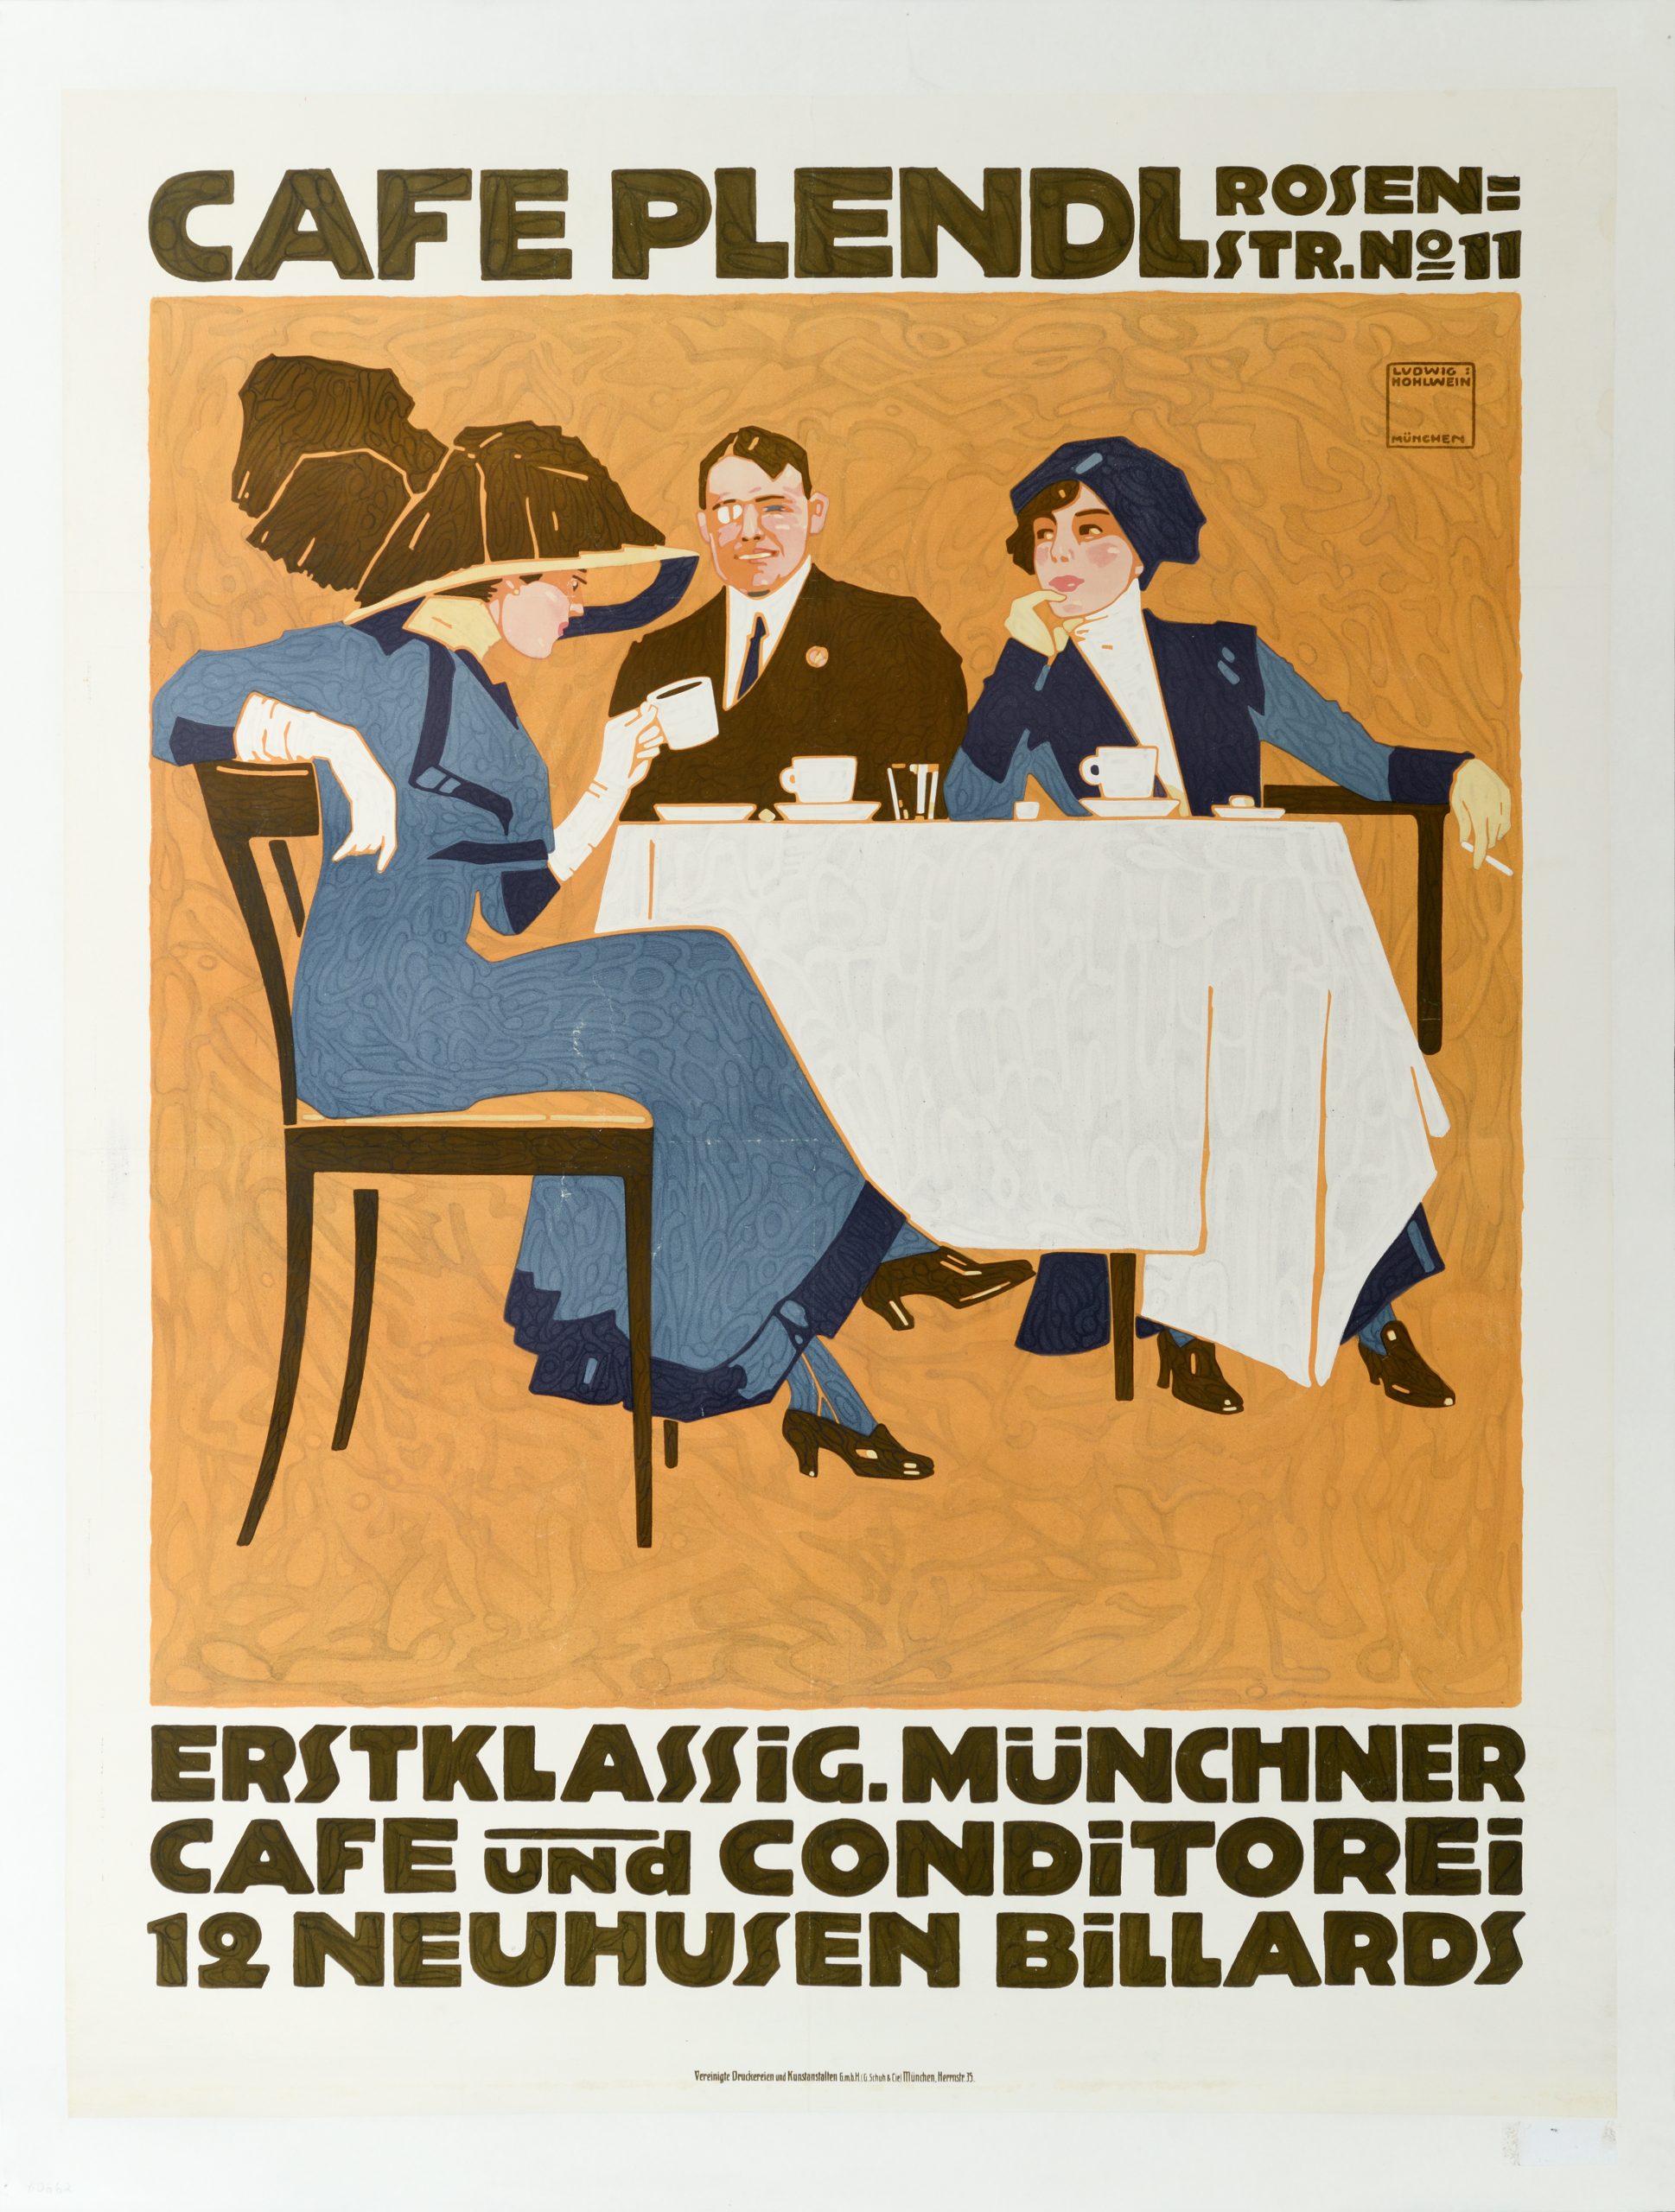 Lithographic poster of 3 figures dining at a café wearing fancy attire.